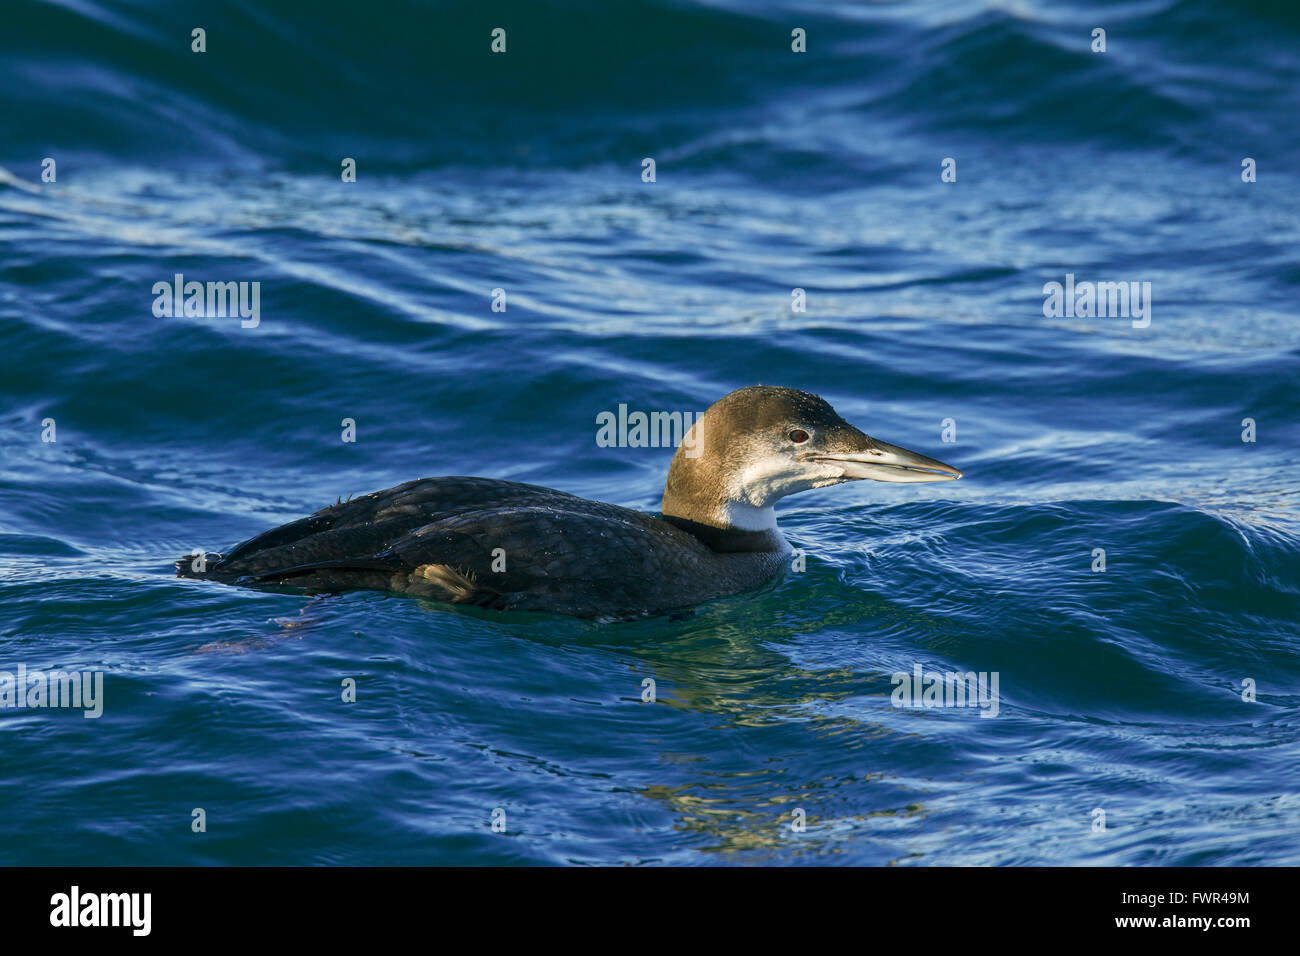 Common loon / great northern diver / great northern loon (Gavia immer) swimming at sea in winter Stock Photo